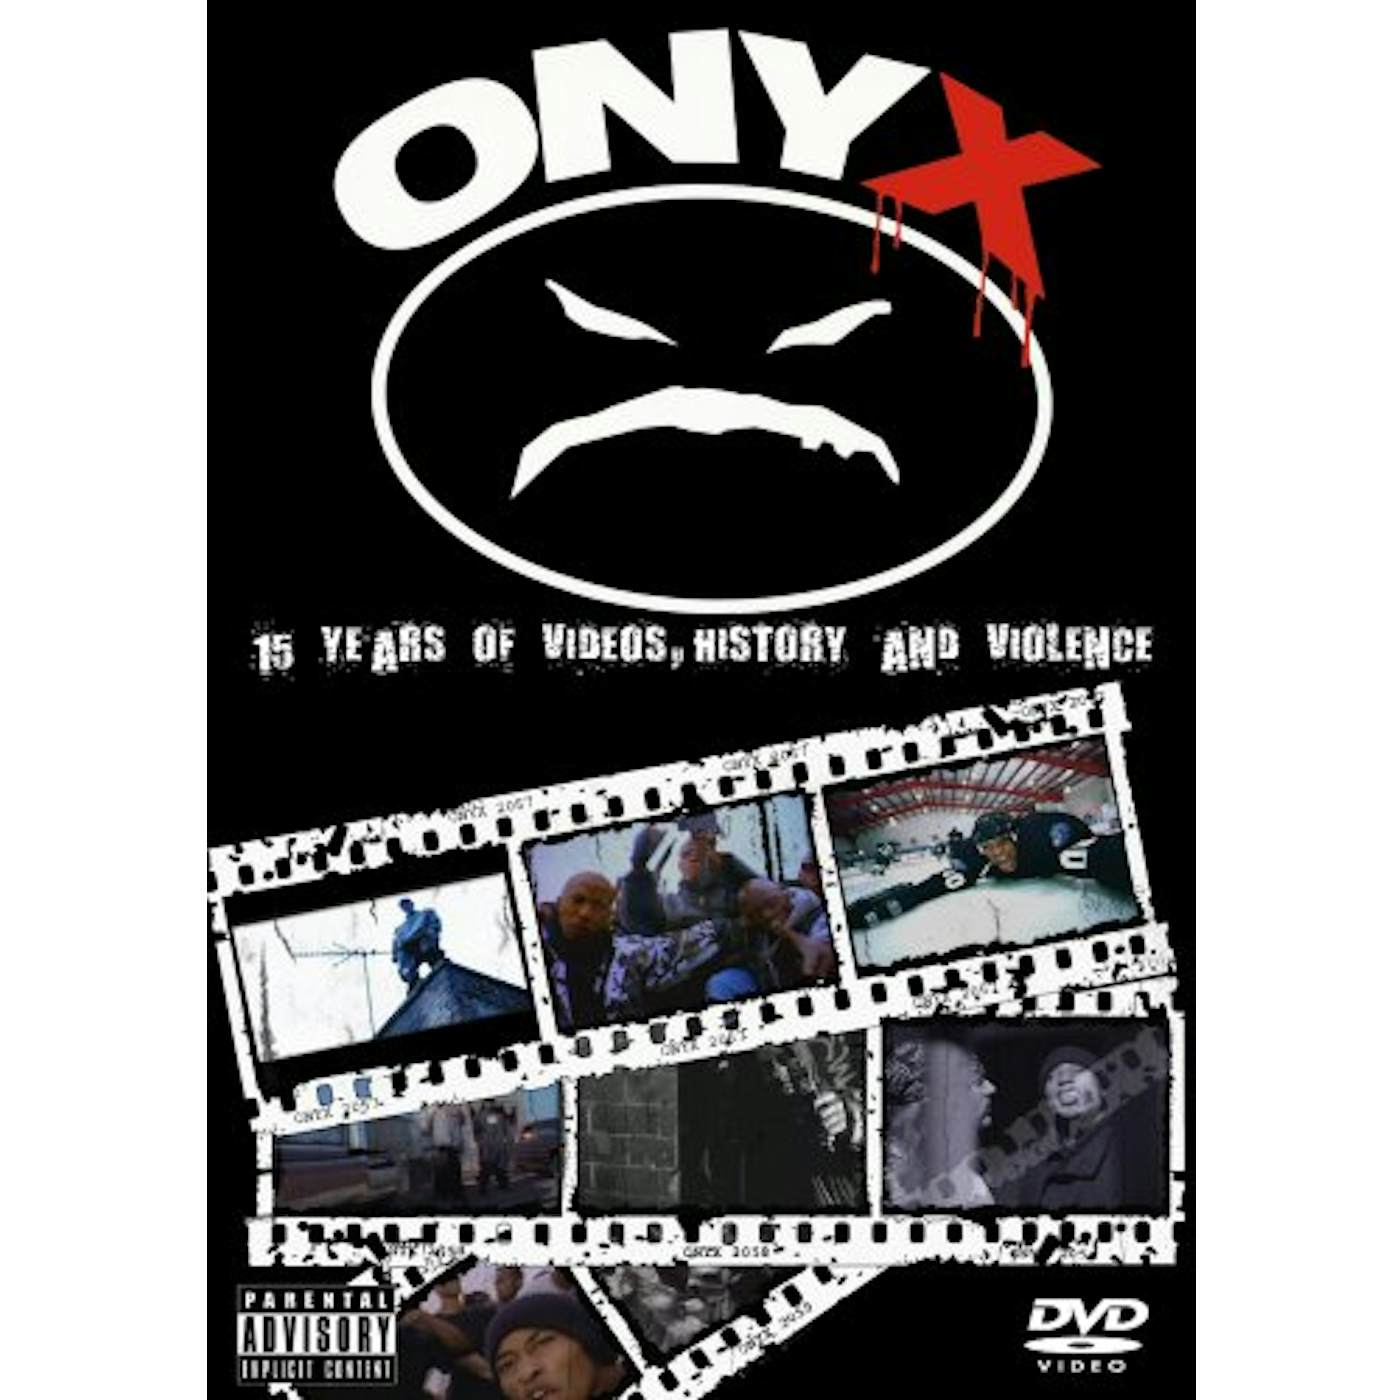 Onyx 15 YEARS OF VIDEOS HISTORY & VIOLENCE DVD